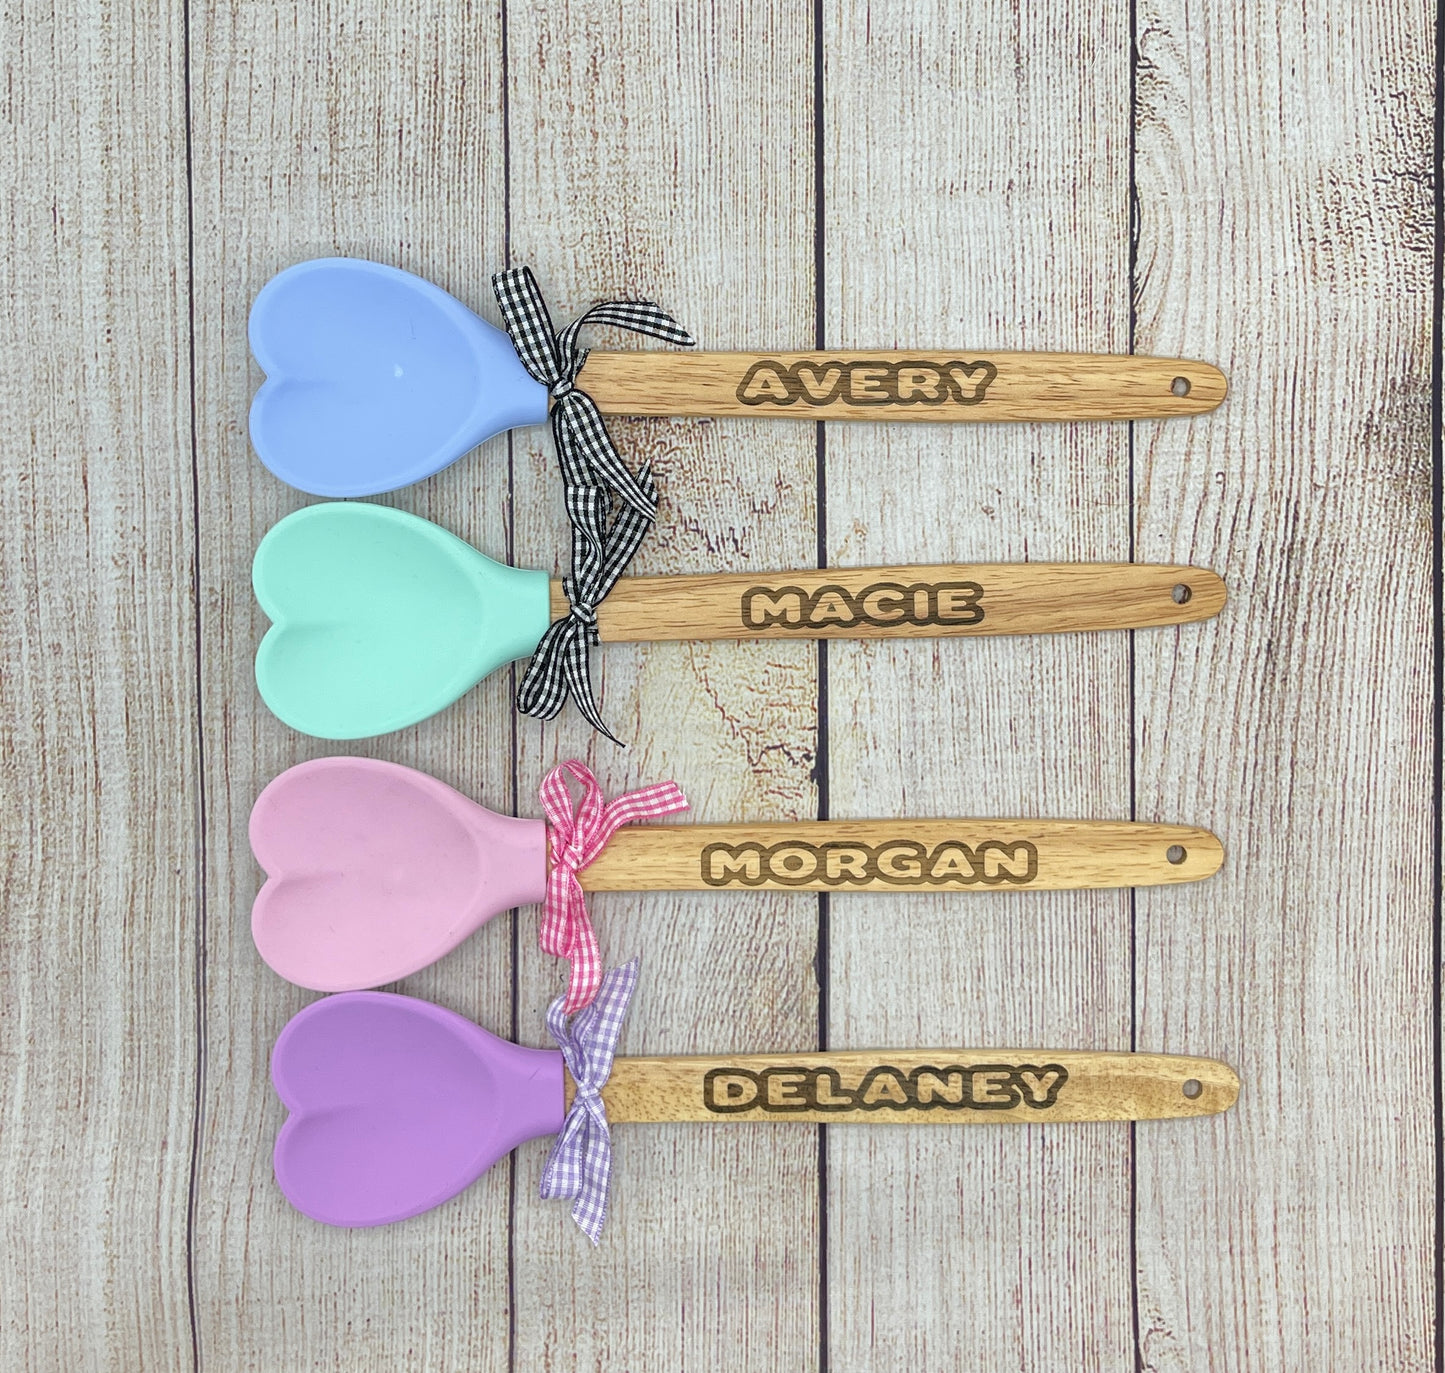 One Personalized Heart Shaped Silicone Spatula for Kids or Adults with Name Engraved in wood handle